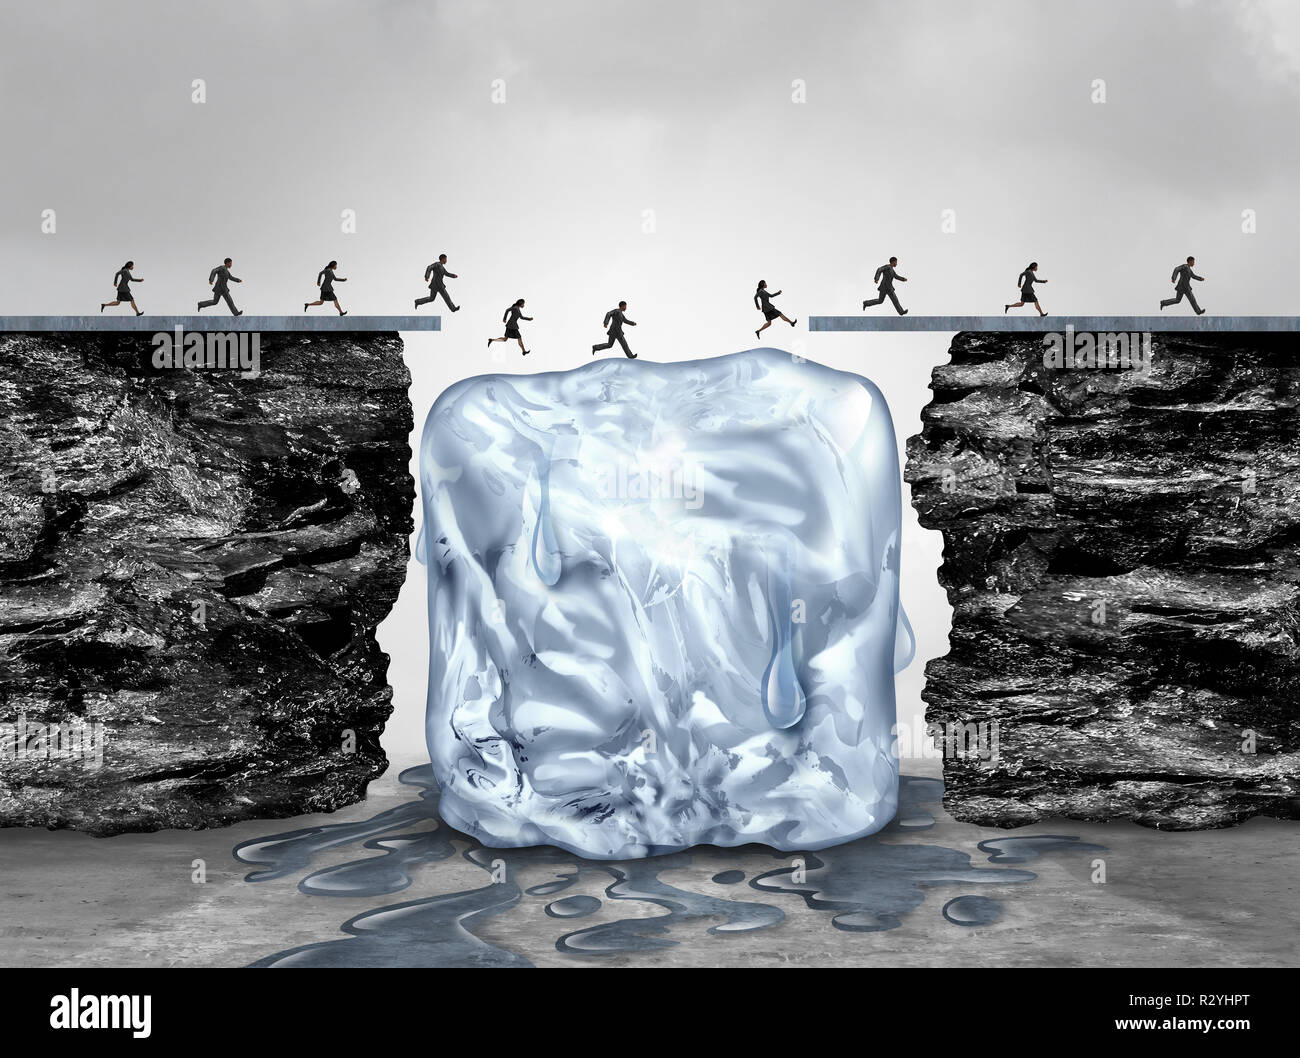 Limited time opportunity and urgent act fast business concept as a bridge made of ice melting away as an emergency deadline or expiration symbol. Stock Photo